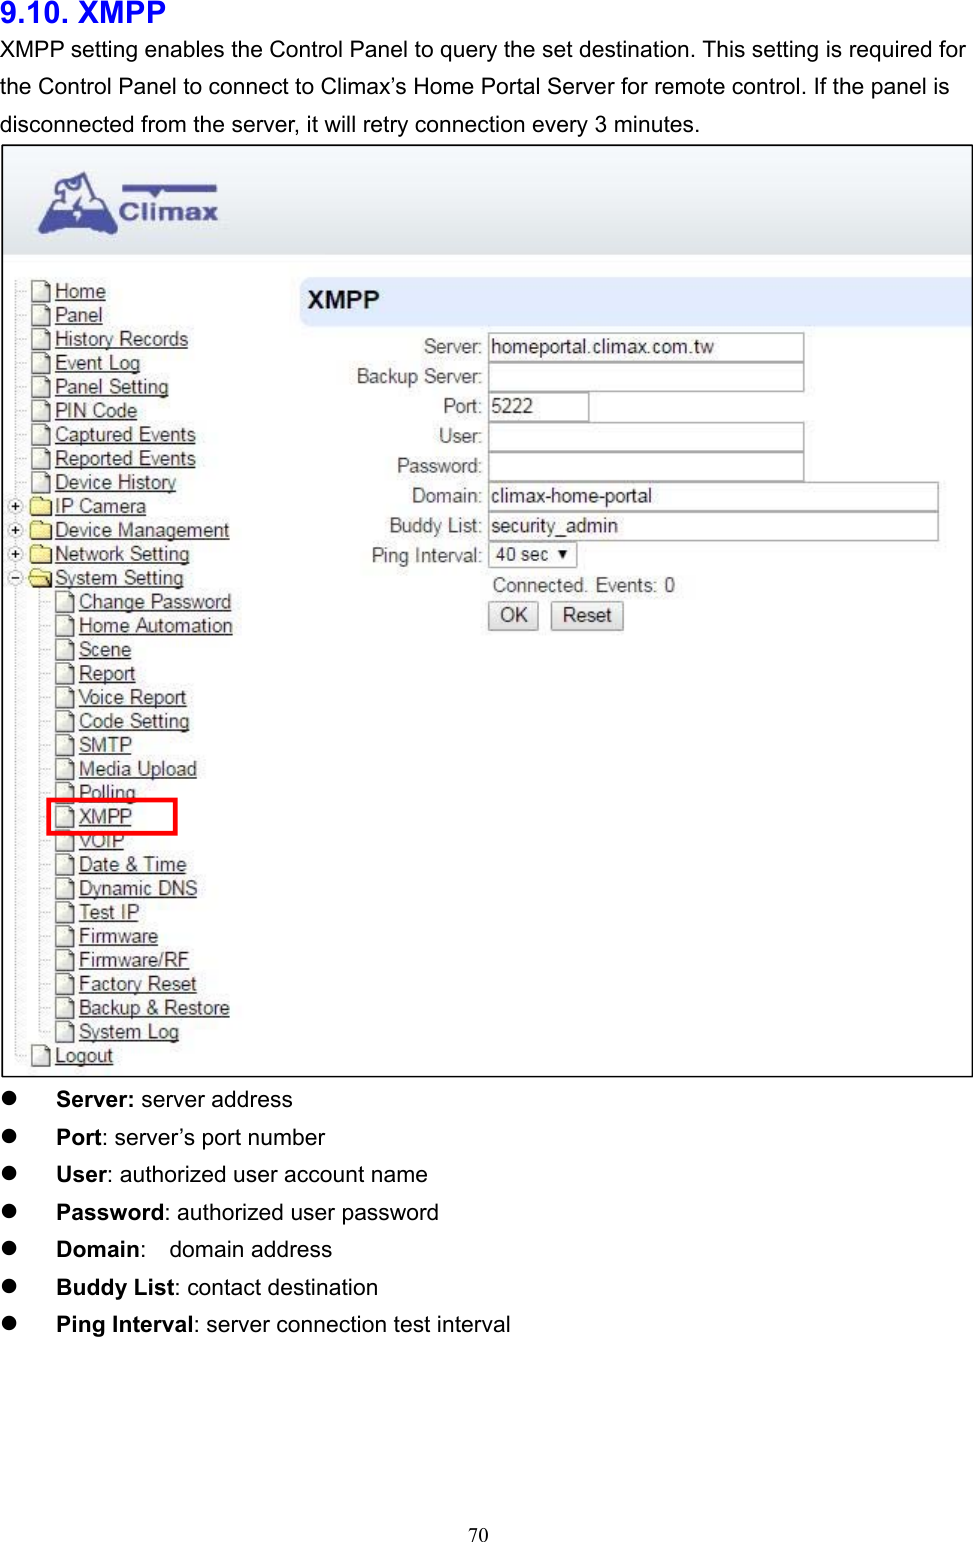  709.10. XMPP    XMPP setting enables the Control Panel to query the set destination. This setting is required for the Control Panel to connect to Climax’s Home Portal Server for remote control. If the panel is disconnected from the server, it will retry connection every 3 minutes.   Server: server address      Port: server’s port number    User: authorized user account name    Password: authorized user password      Domain:   domain address    Buddy List: contact destination        Ping Interval: server connection test interval    